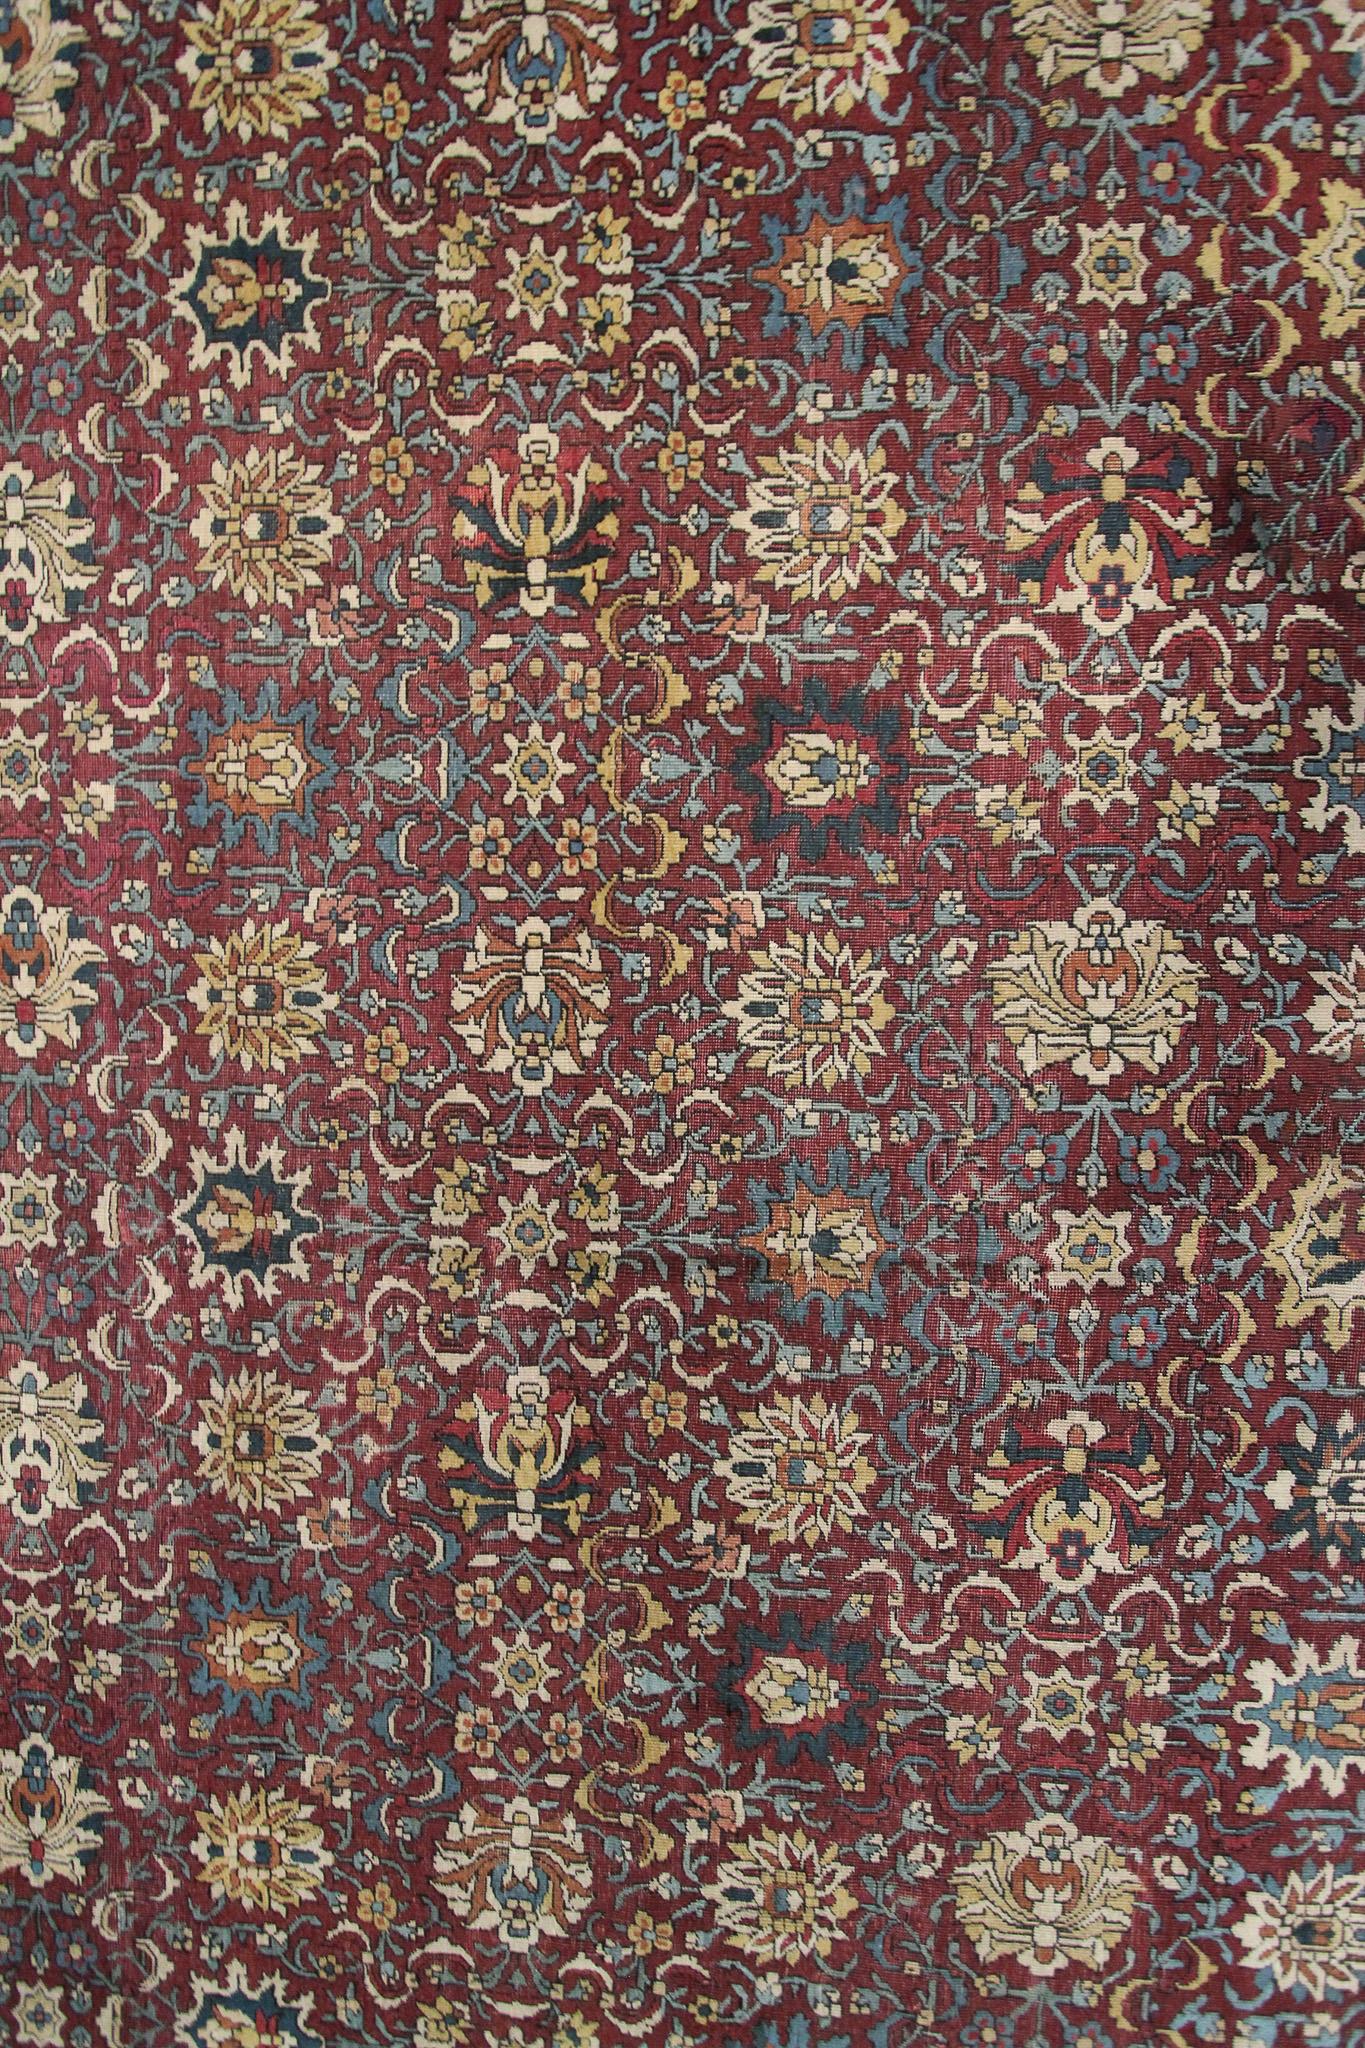 Mid-1800 Antique Mogul Rug Geometric 10x20 Oversized Antique Rug 298x597cm In Good Condition For Sale In New York, NY